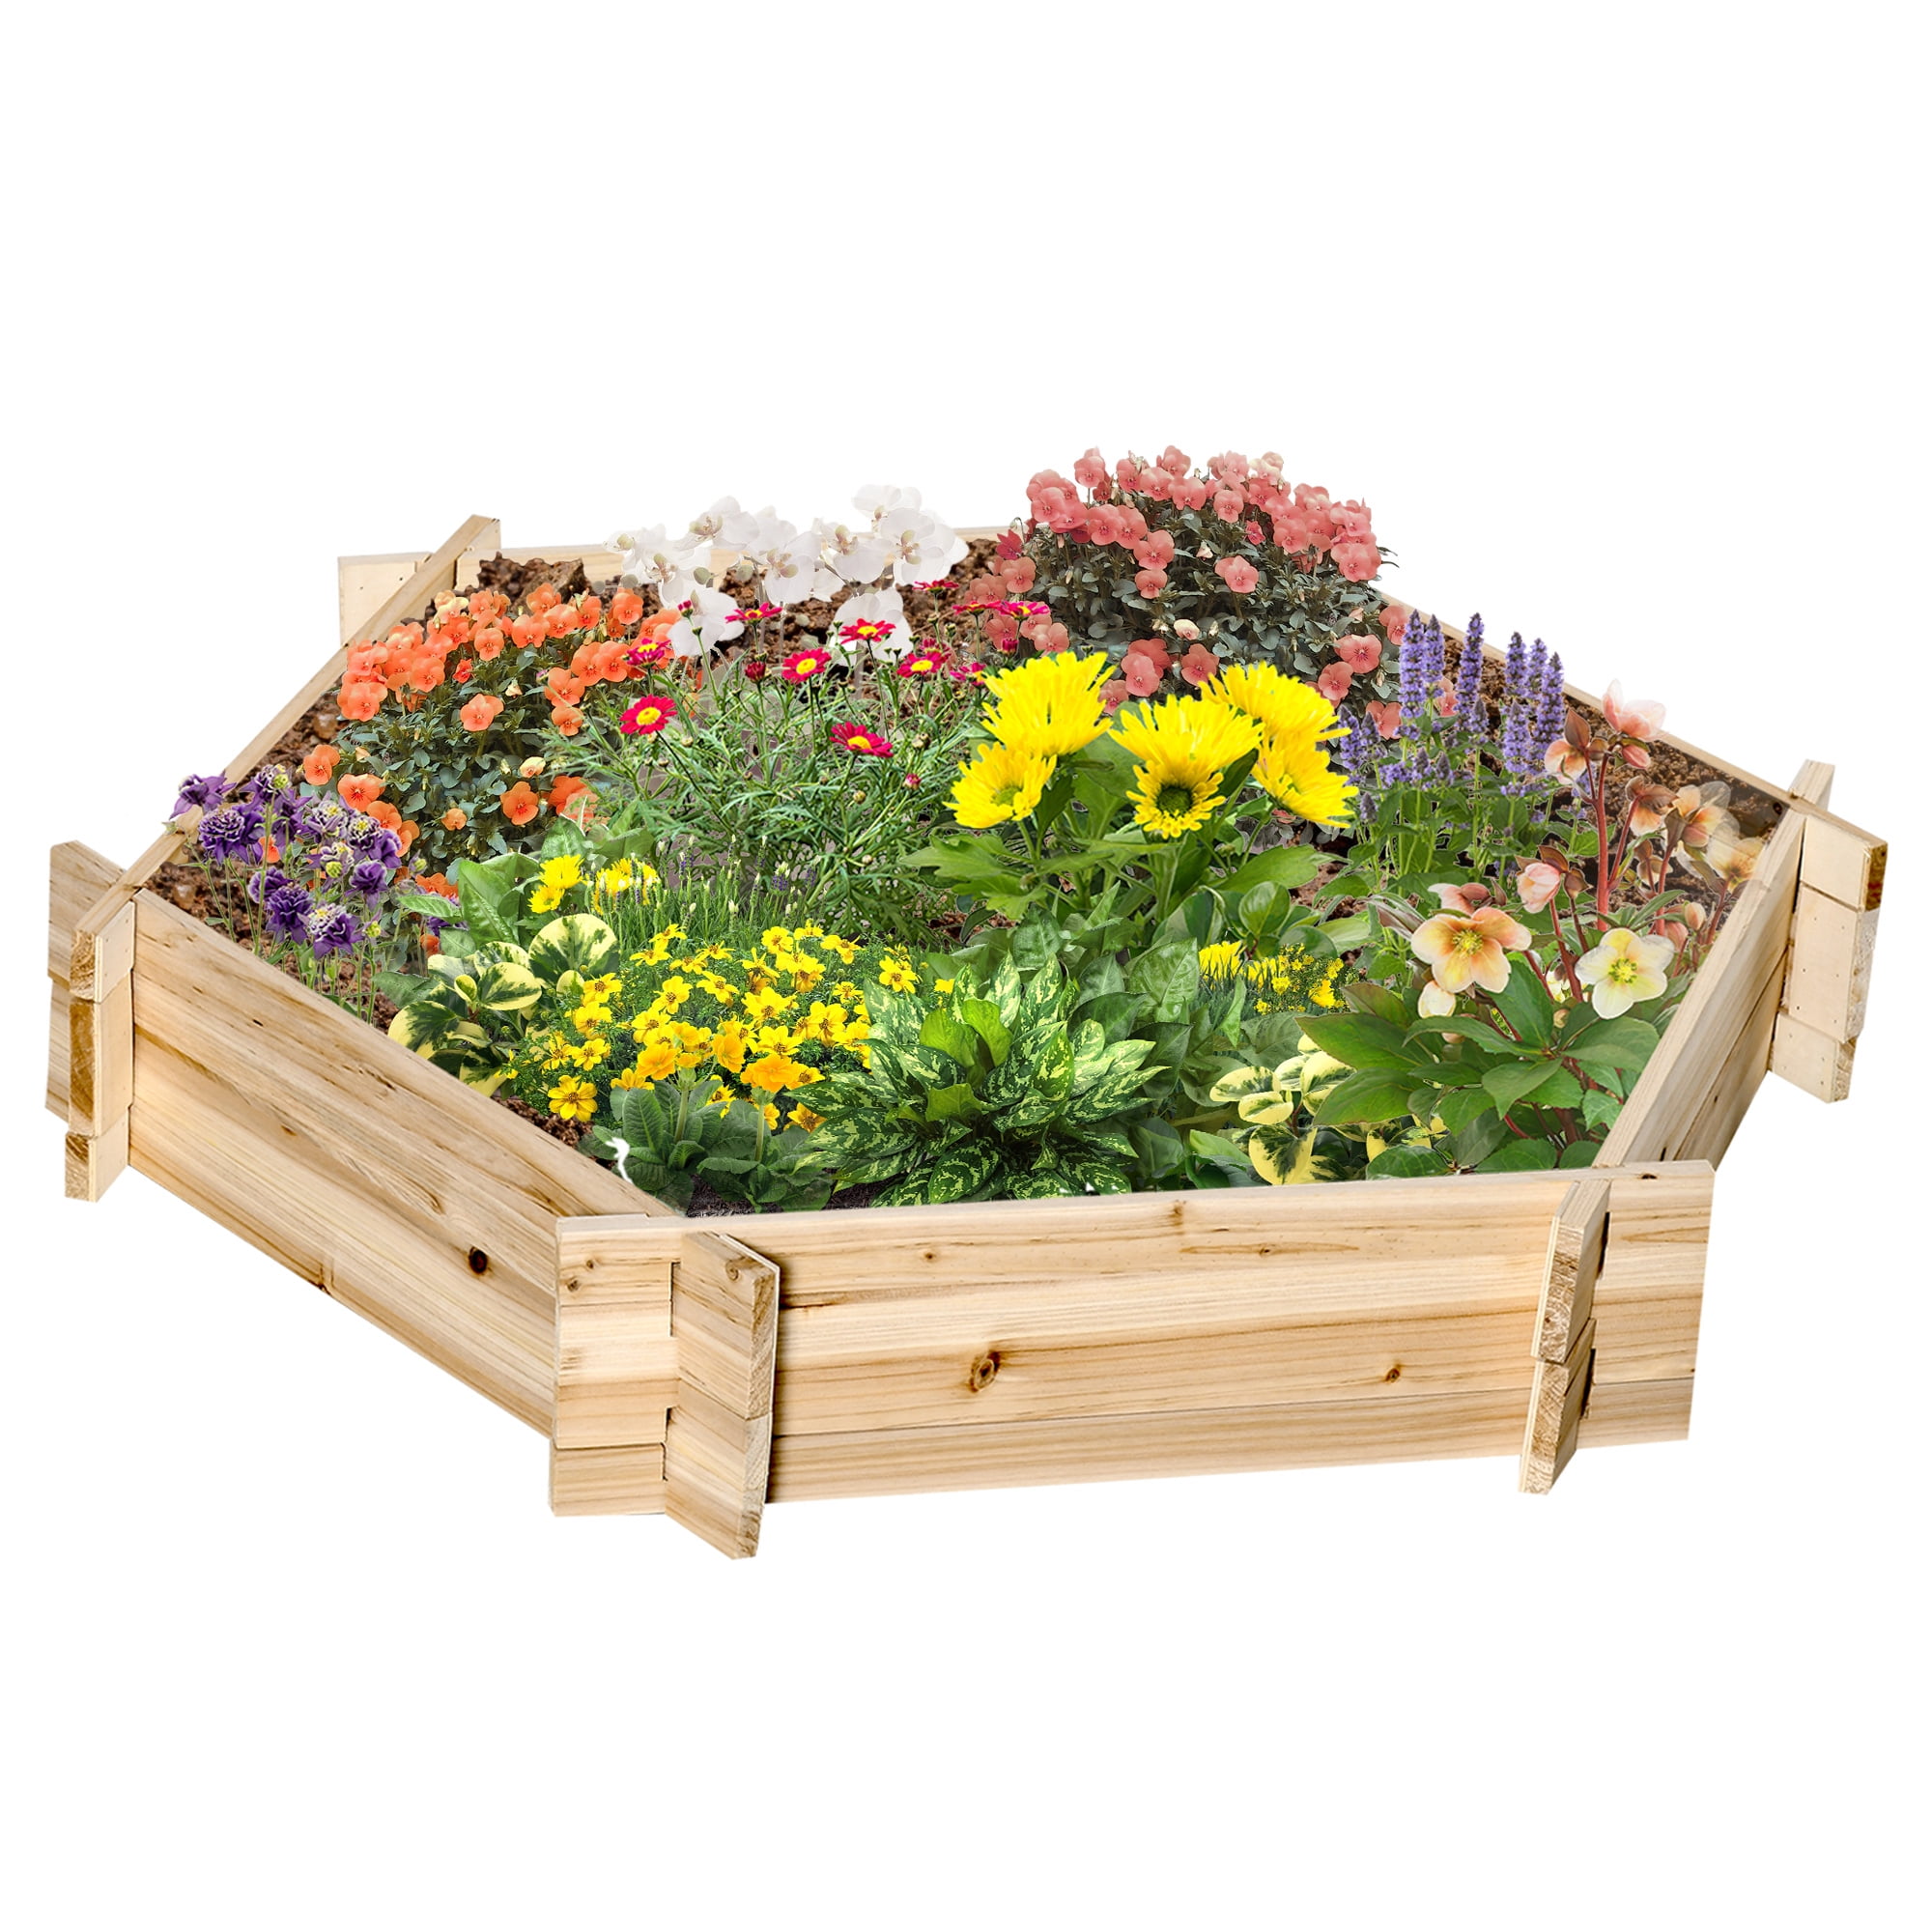 Outsunny 4ft x 4ft Backyard Raised Garden Bed Box with Segmented Growing Grid Wood Material for Plants & Herbs 